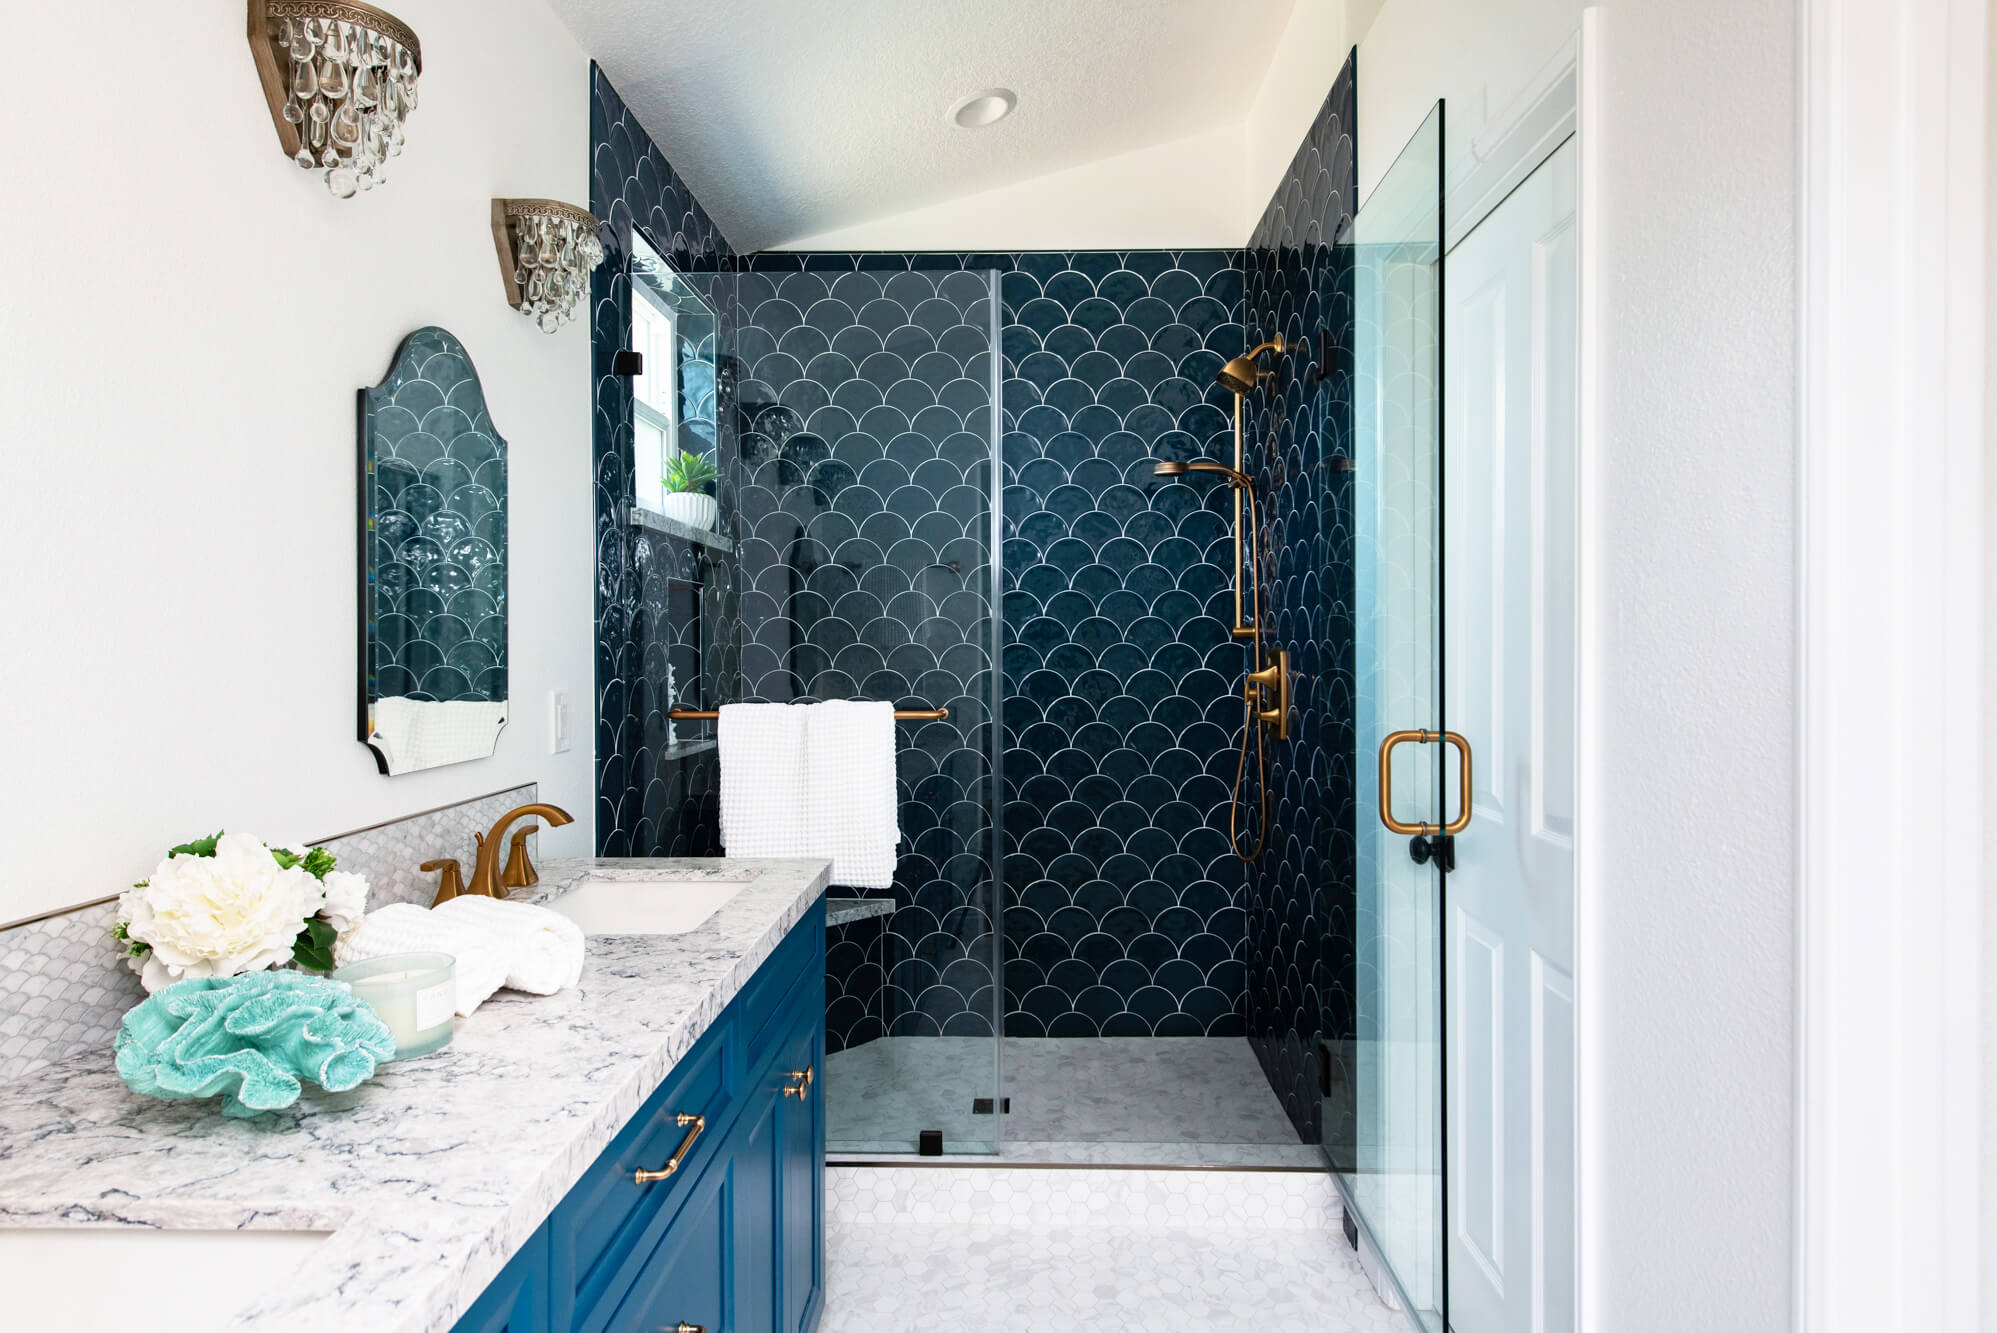 Tub-to-shower-conversion-in-master-bathroom-remodel